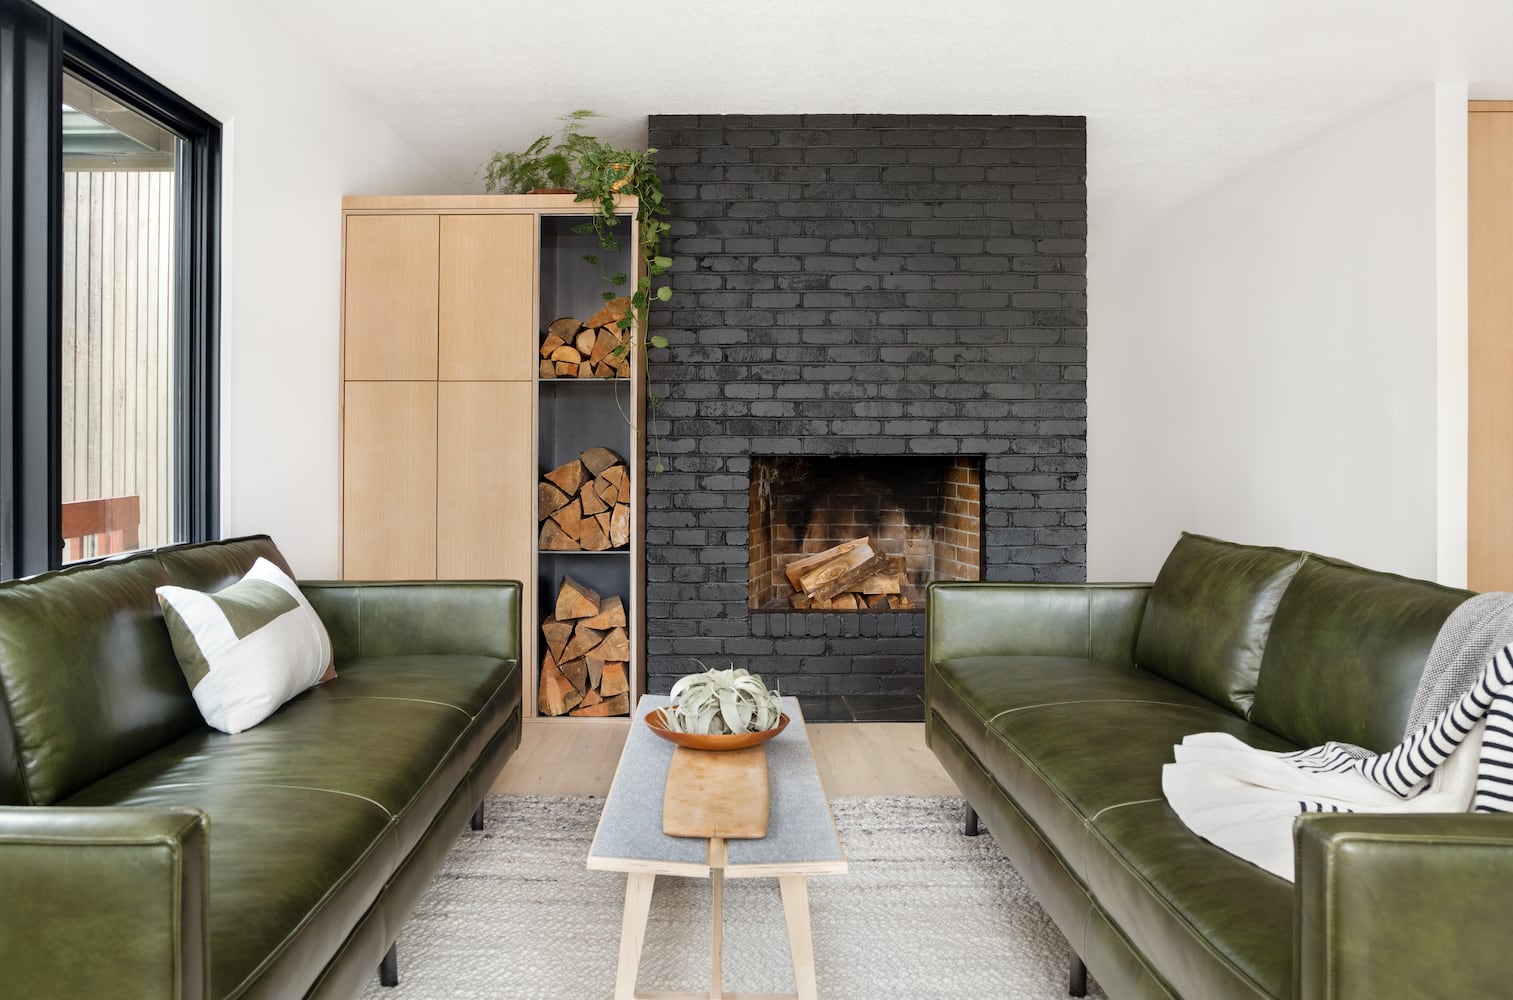 Modern house living room with green leather sofas, black fireplace, firewood storage